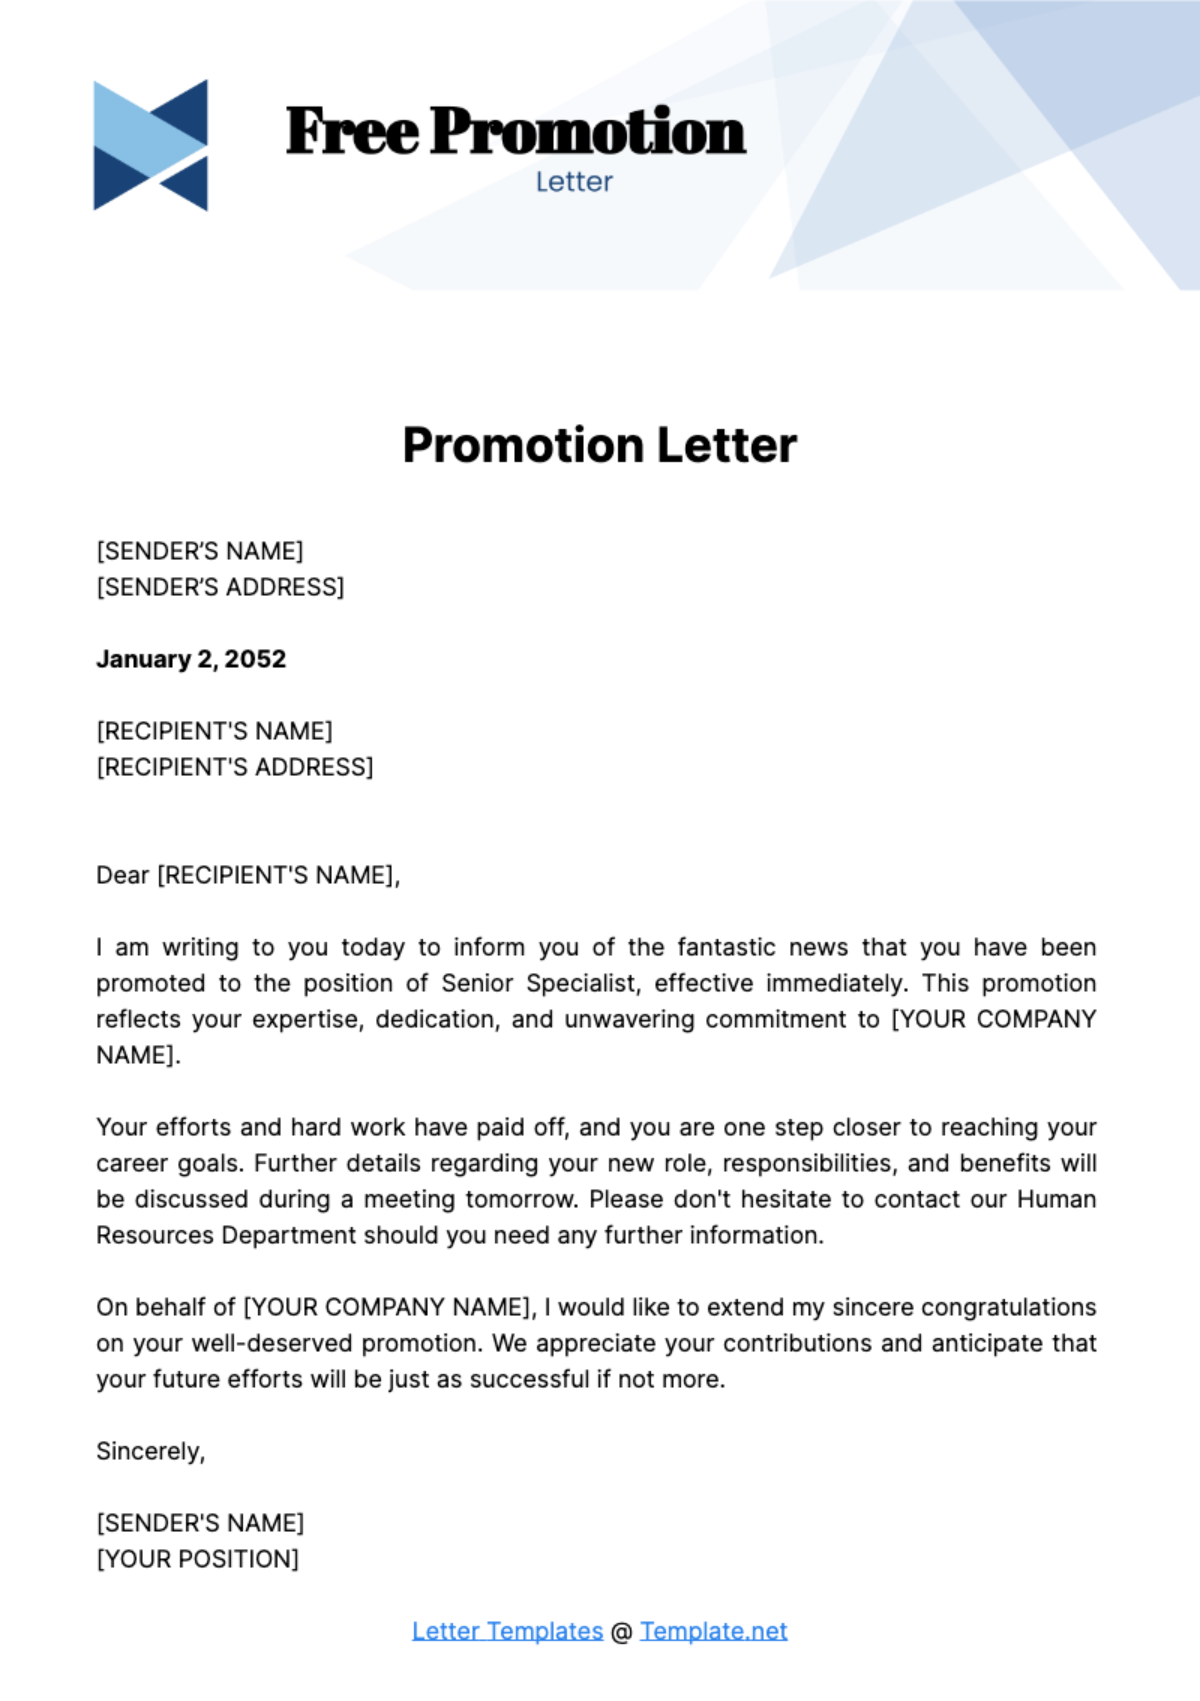 Free Promotion Letter Template